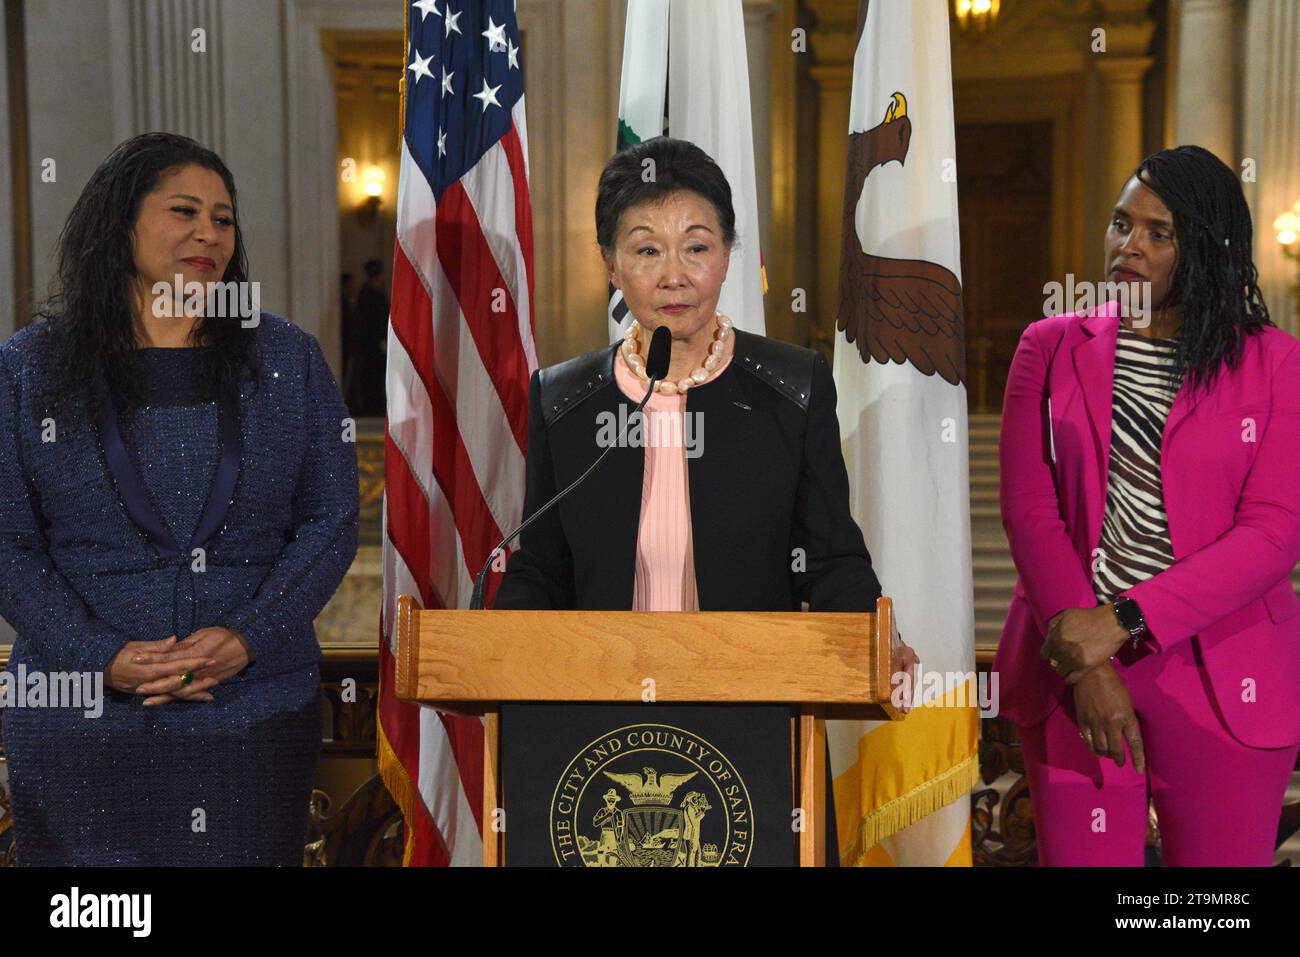 San Francisco, CA - March 8, 2023: Florence Fang, Chairwoman of the Florence Fang Family Foundation, speaking at the International Women’s Day Women's Stock Photo